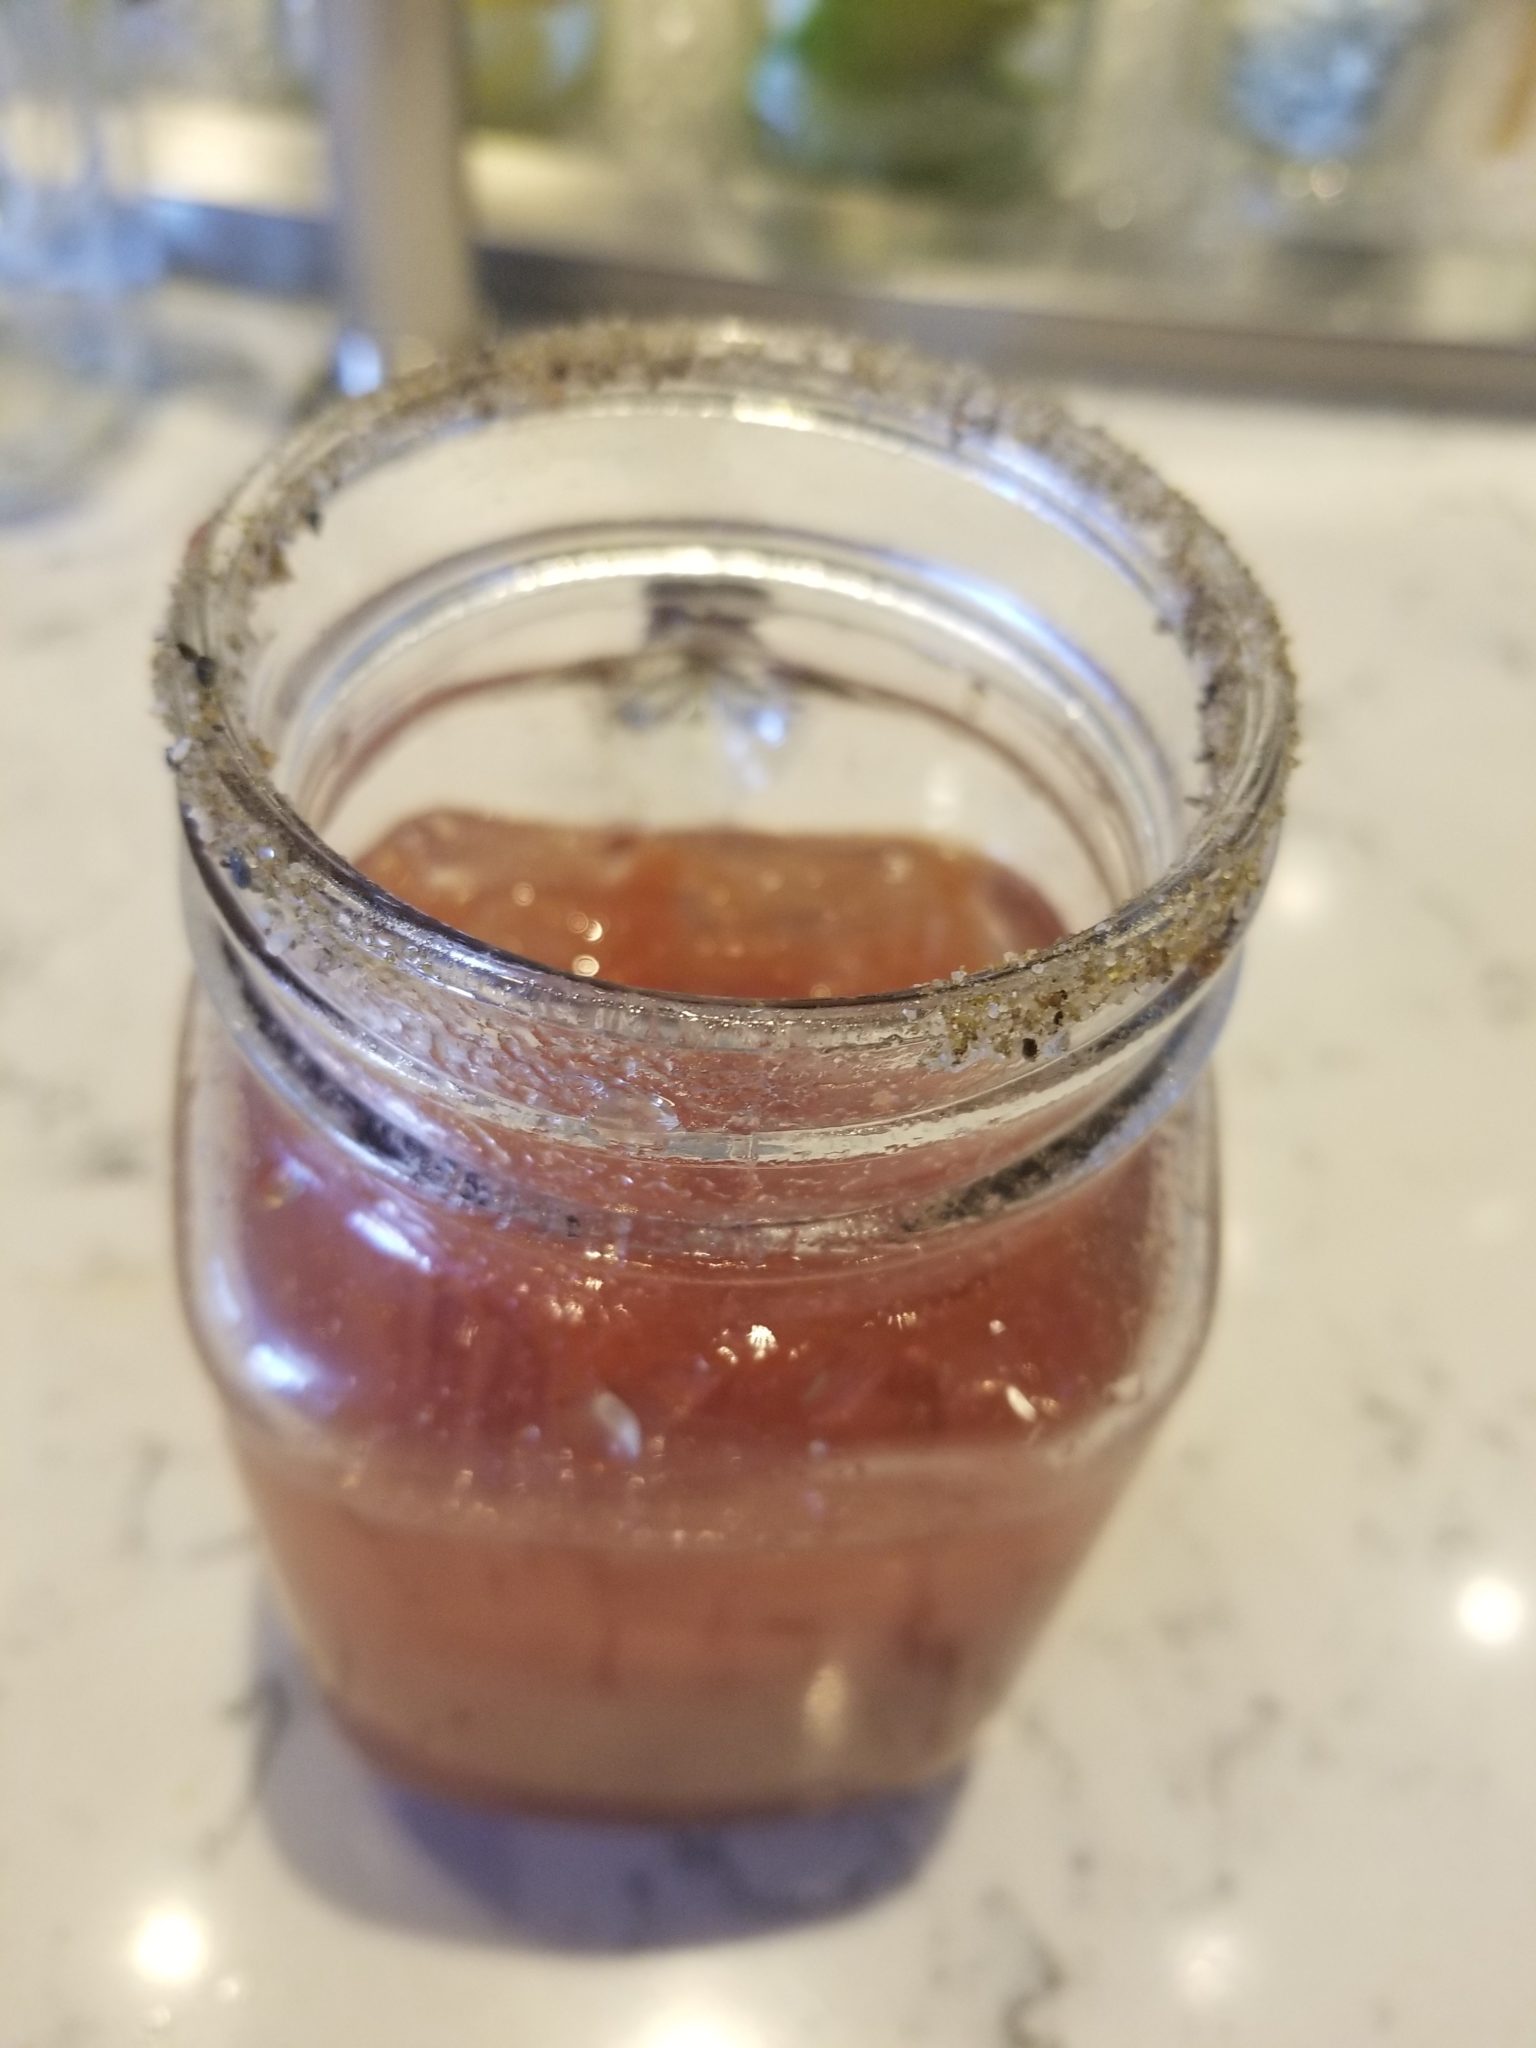 a jar with a red substance